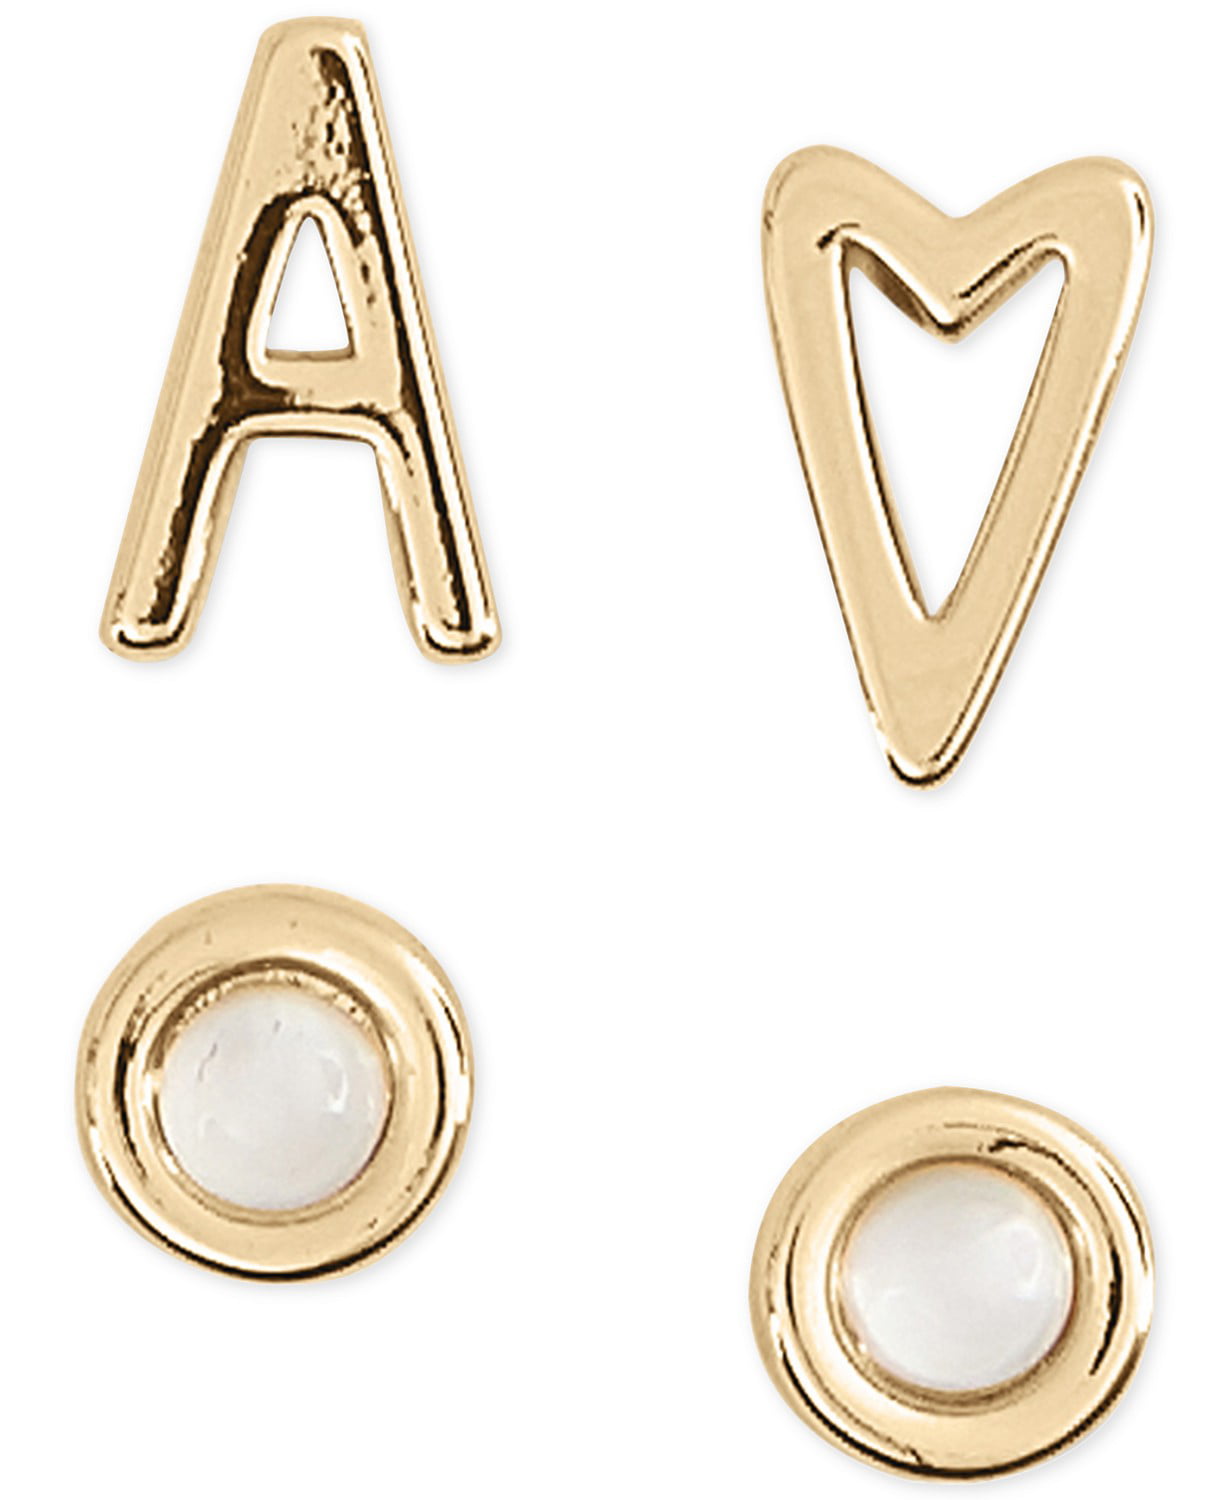 GRAPHICS & MORE Letter O Floral Monogram Initial Novelty Clip-On Stud Earrings